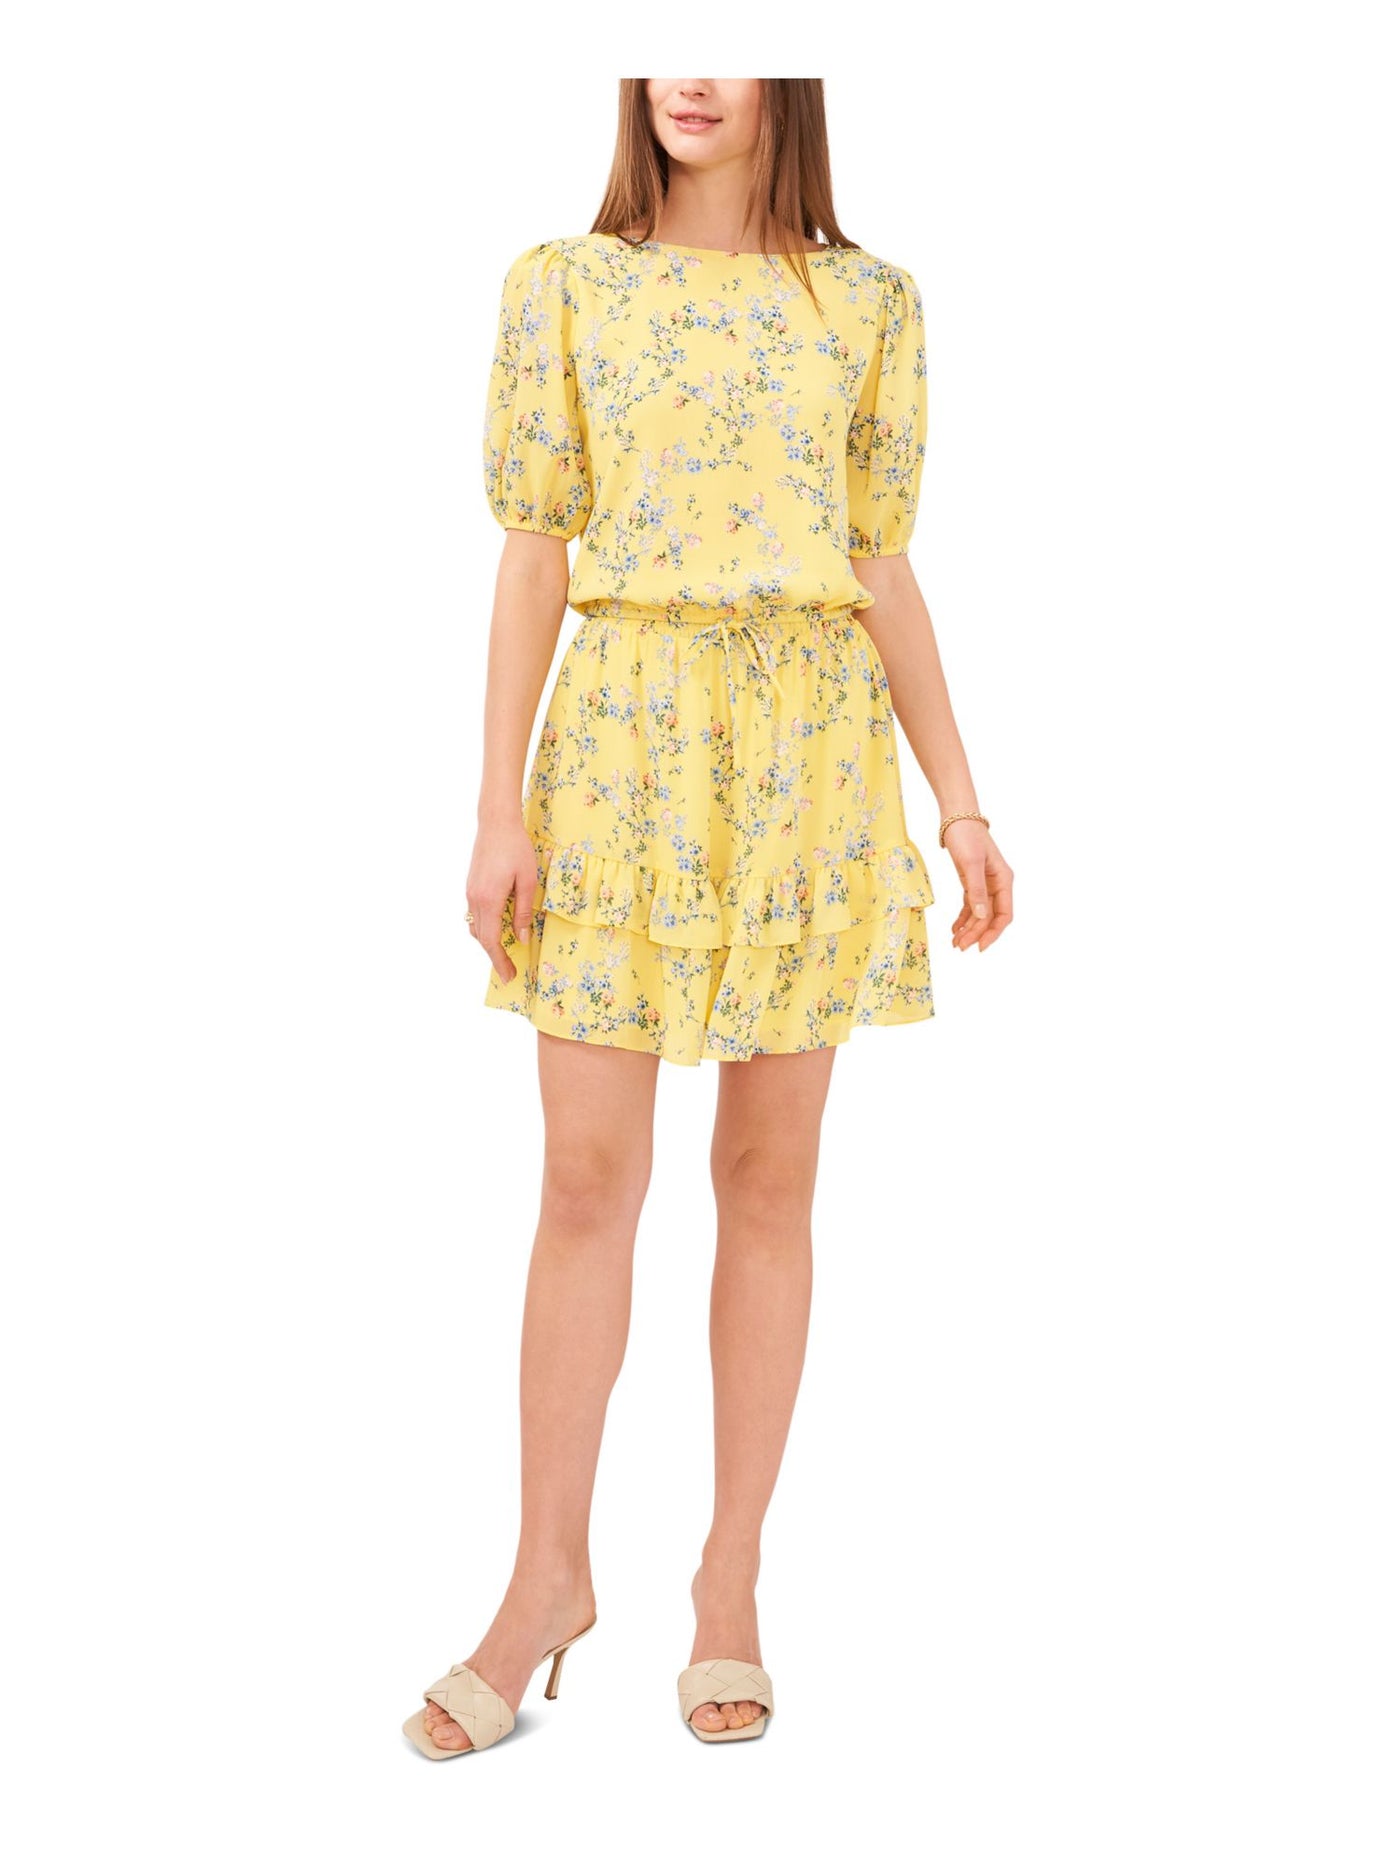 VINCE CAMUTO Womens Yellow Smocked Textured Lined Pull On Floral Mini Ruffled Skirt XL